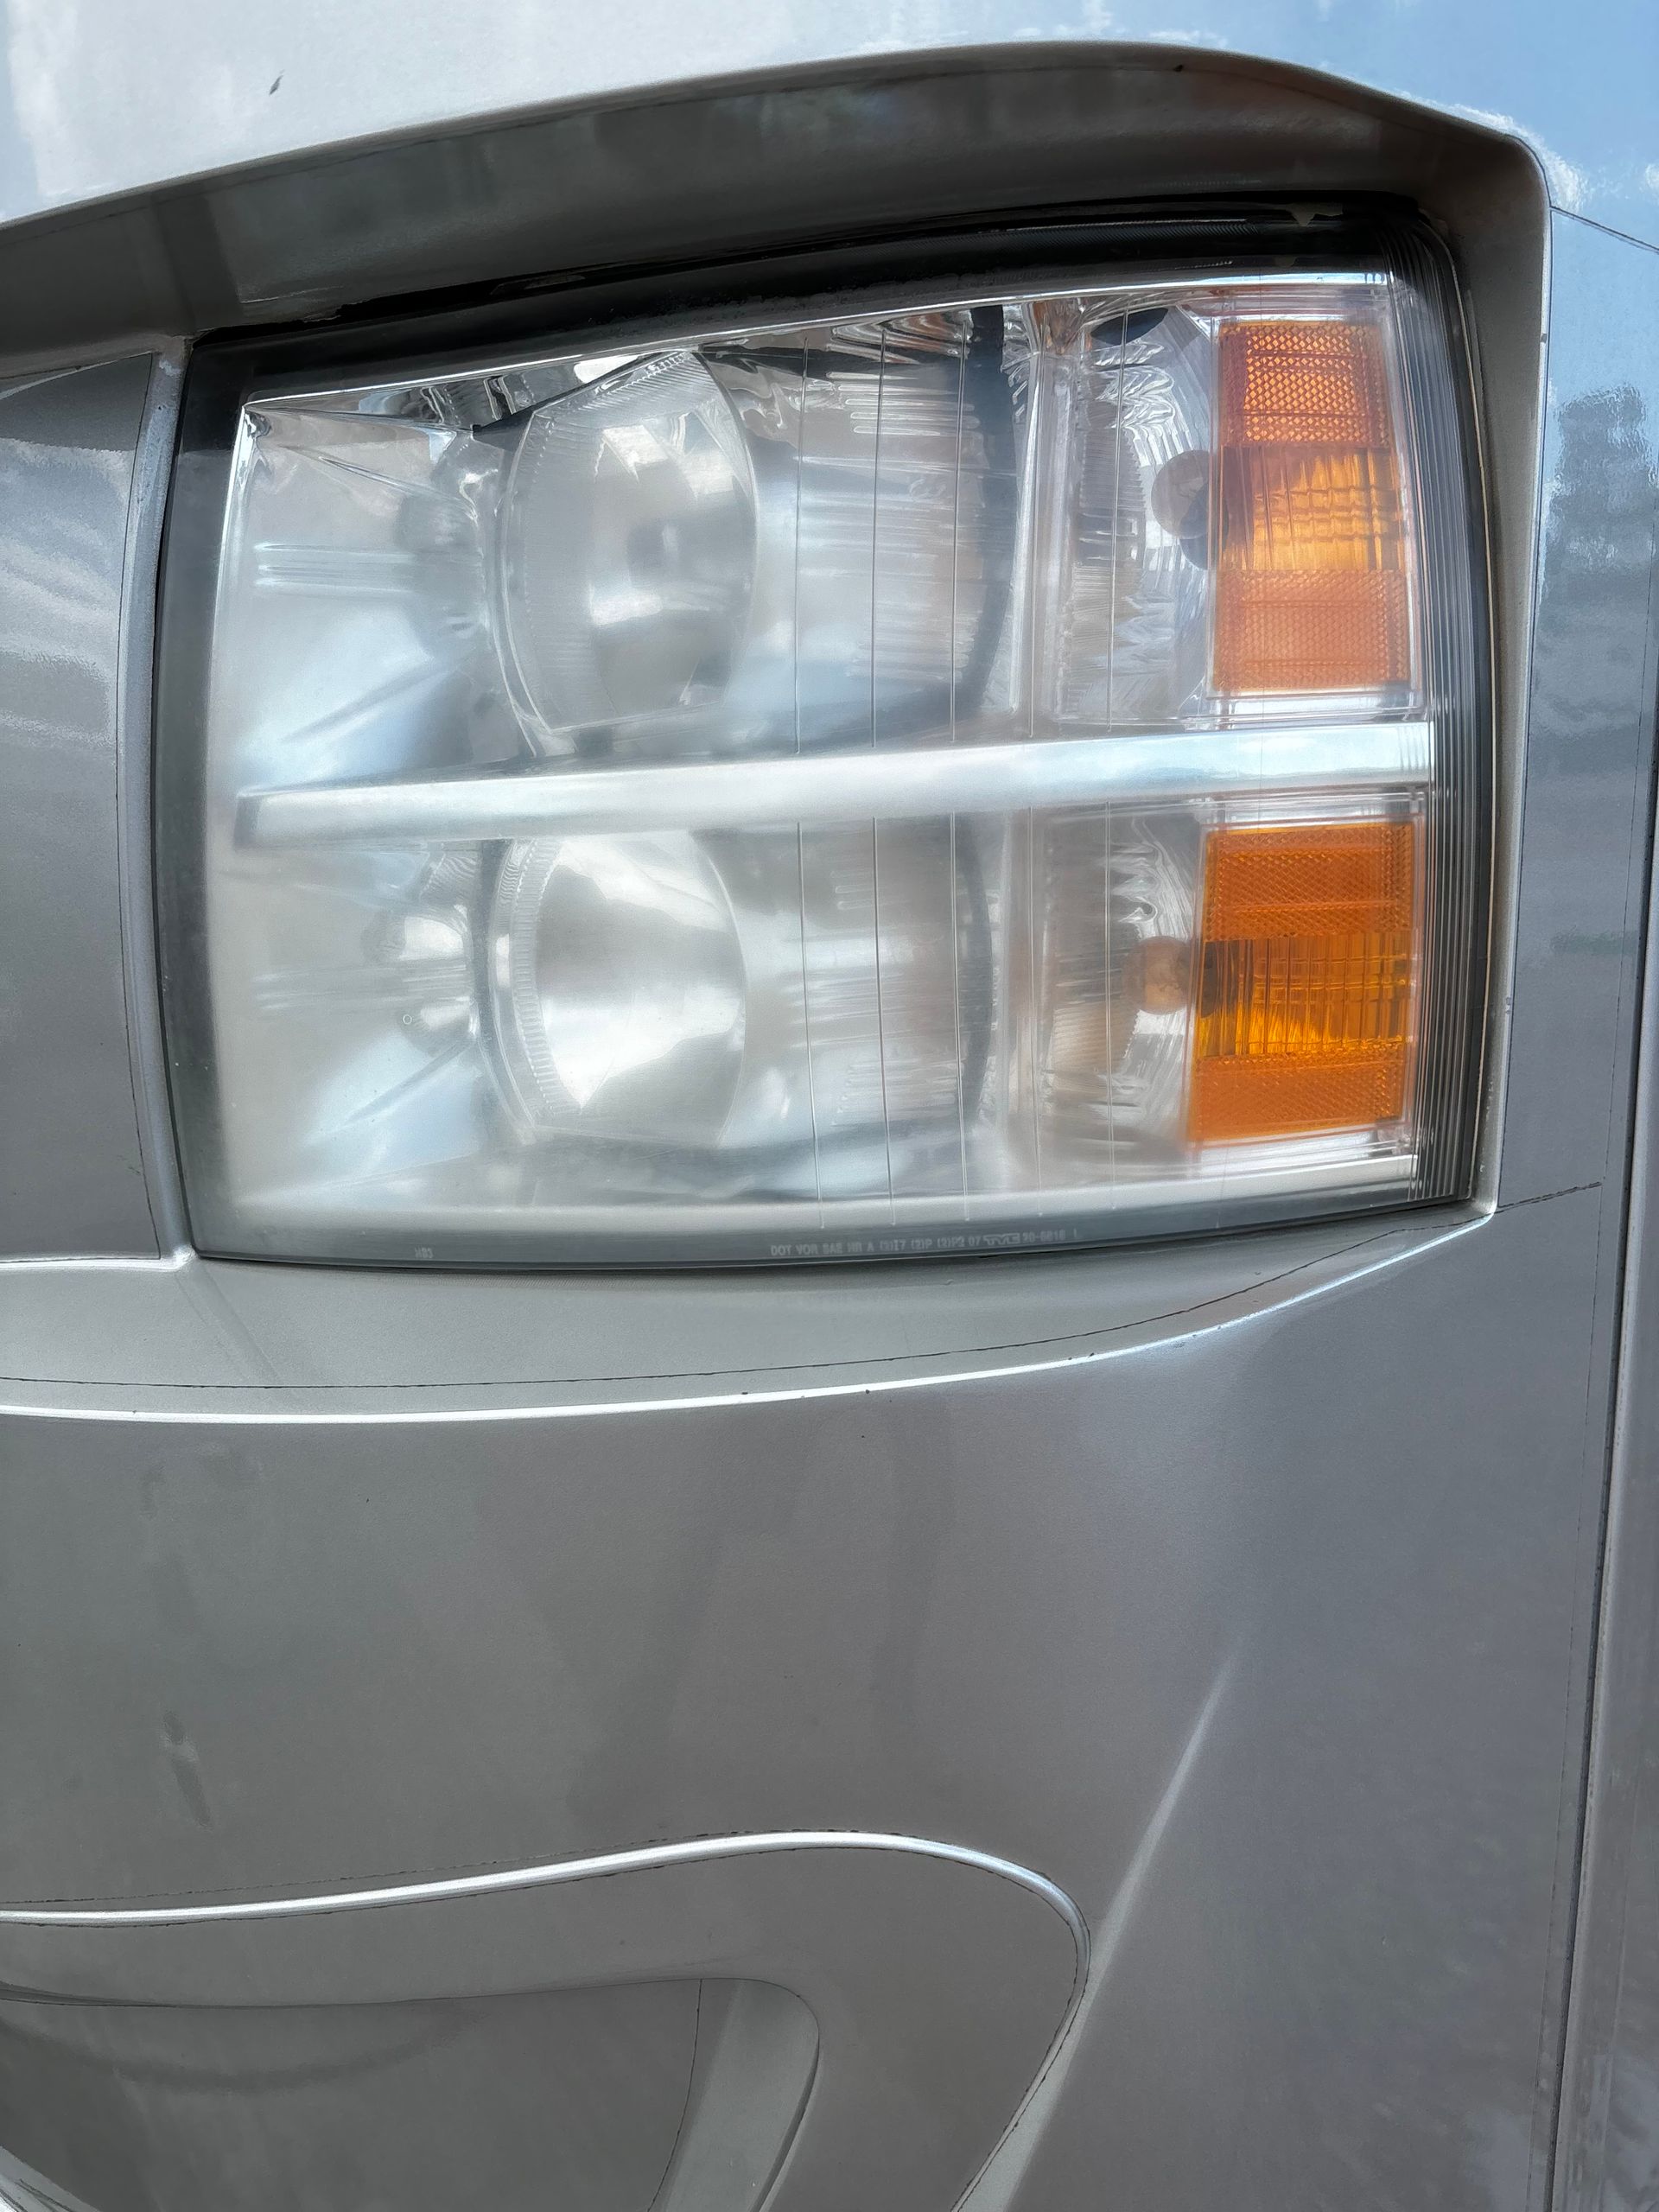 A close up of a silver car 's headlight